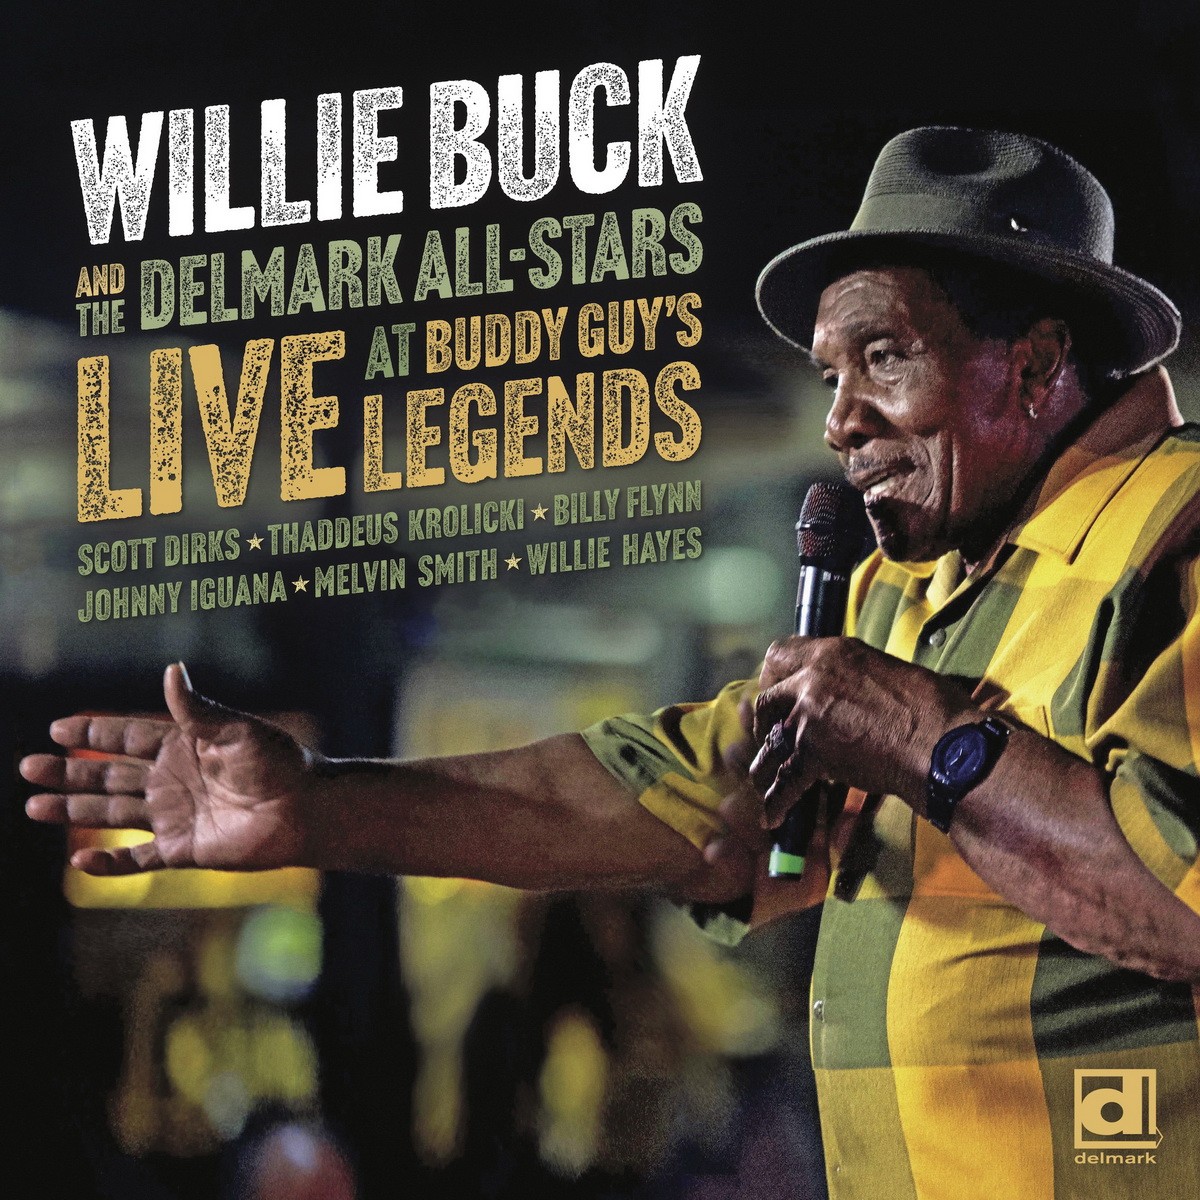 Willie Buck & The Delmark All Stars – LIVE at Buddy Guy’s Legends